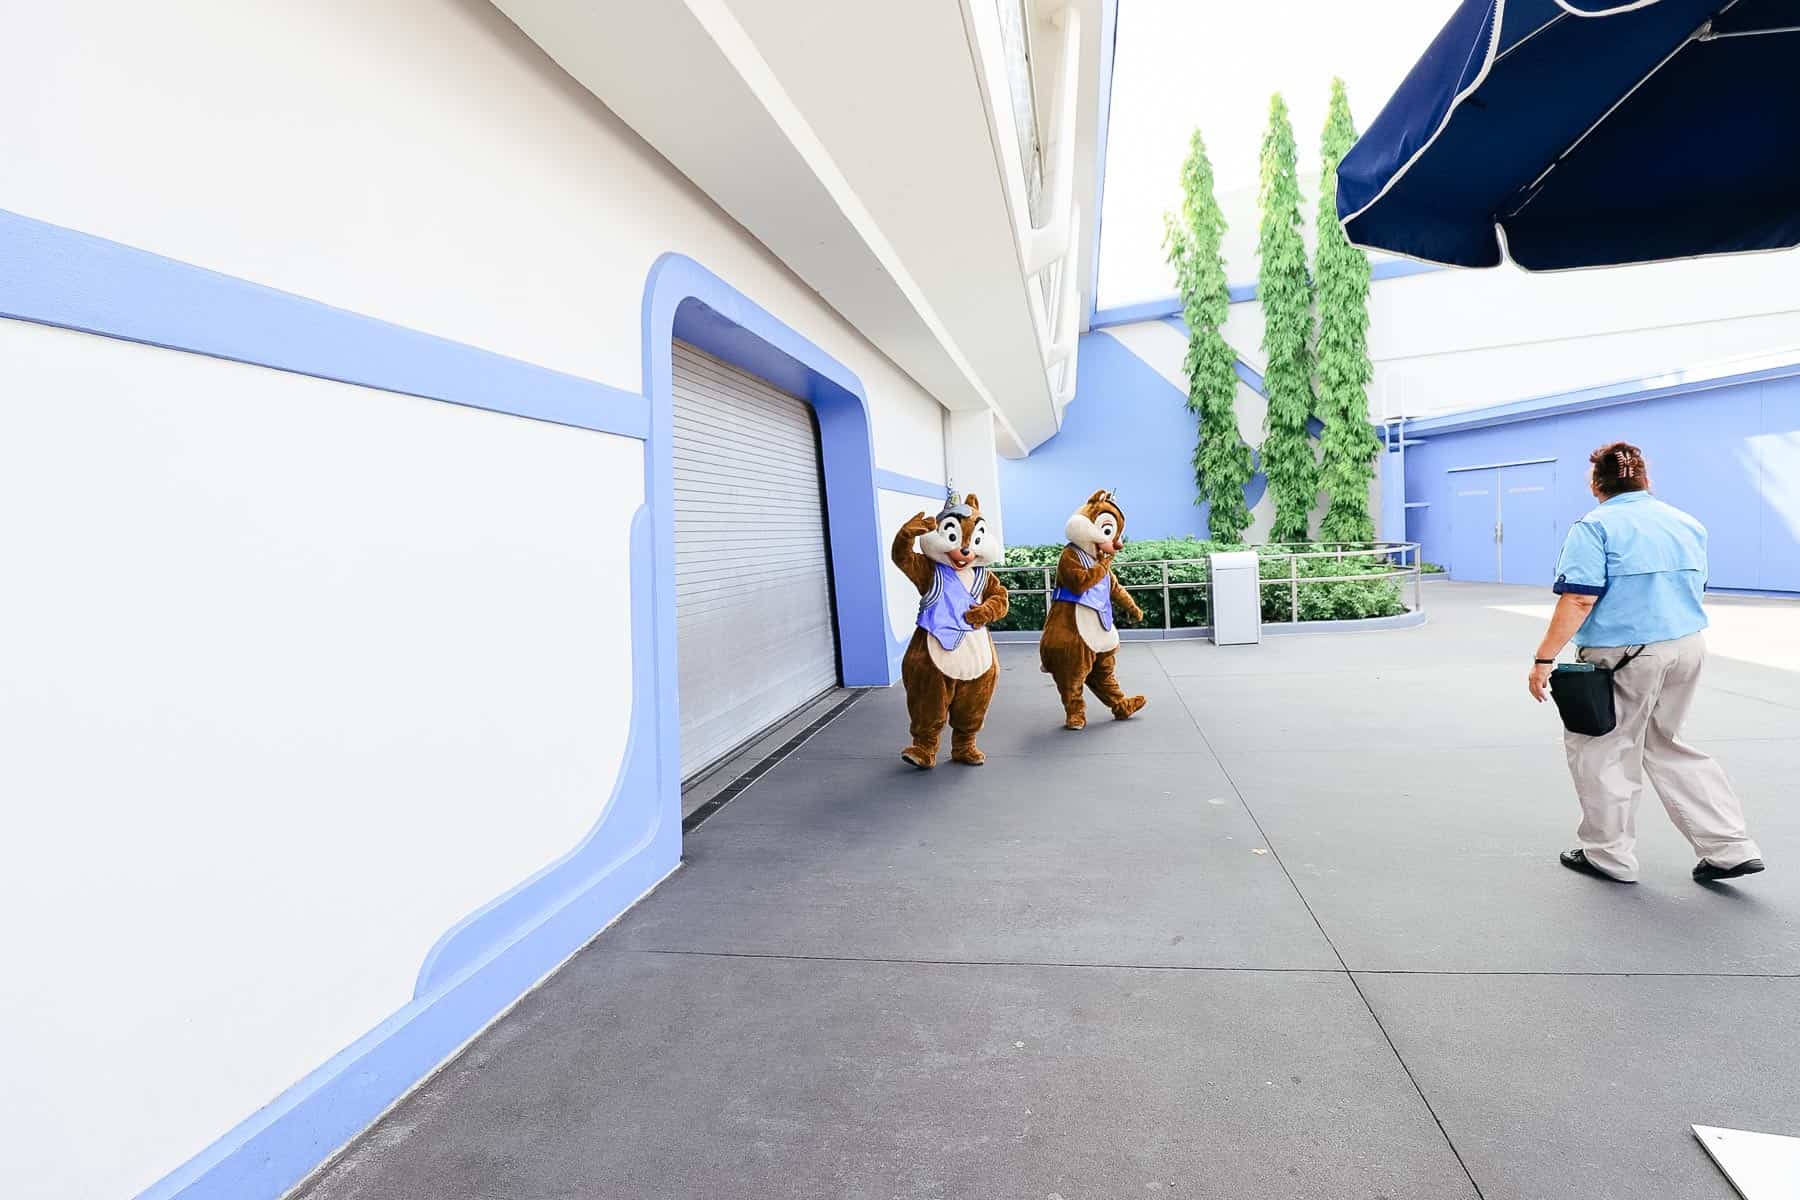 queue for Chip and Dale meet-and-greet 